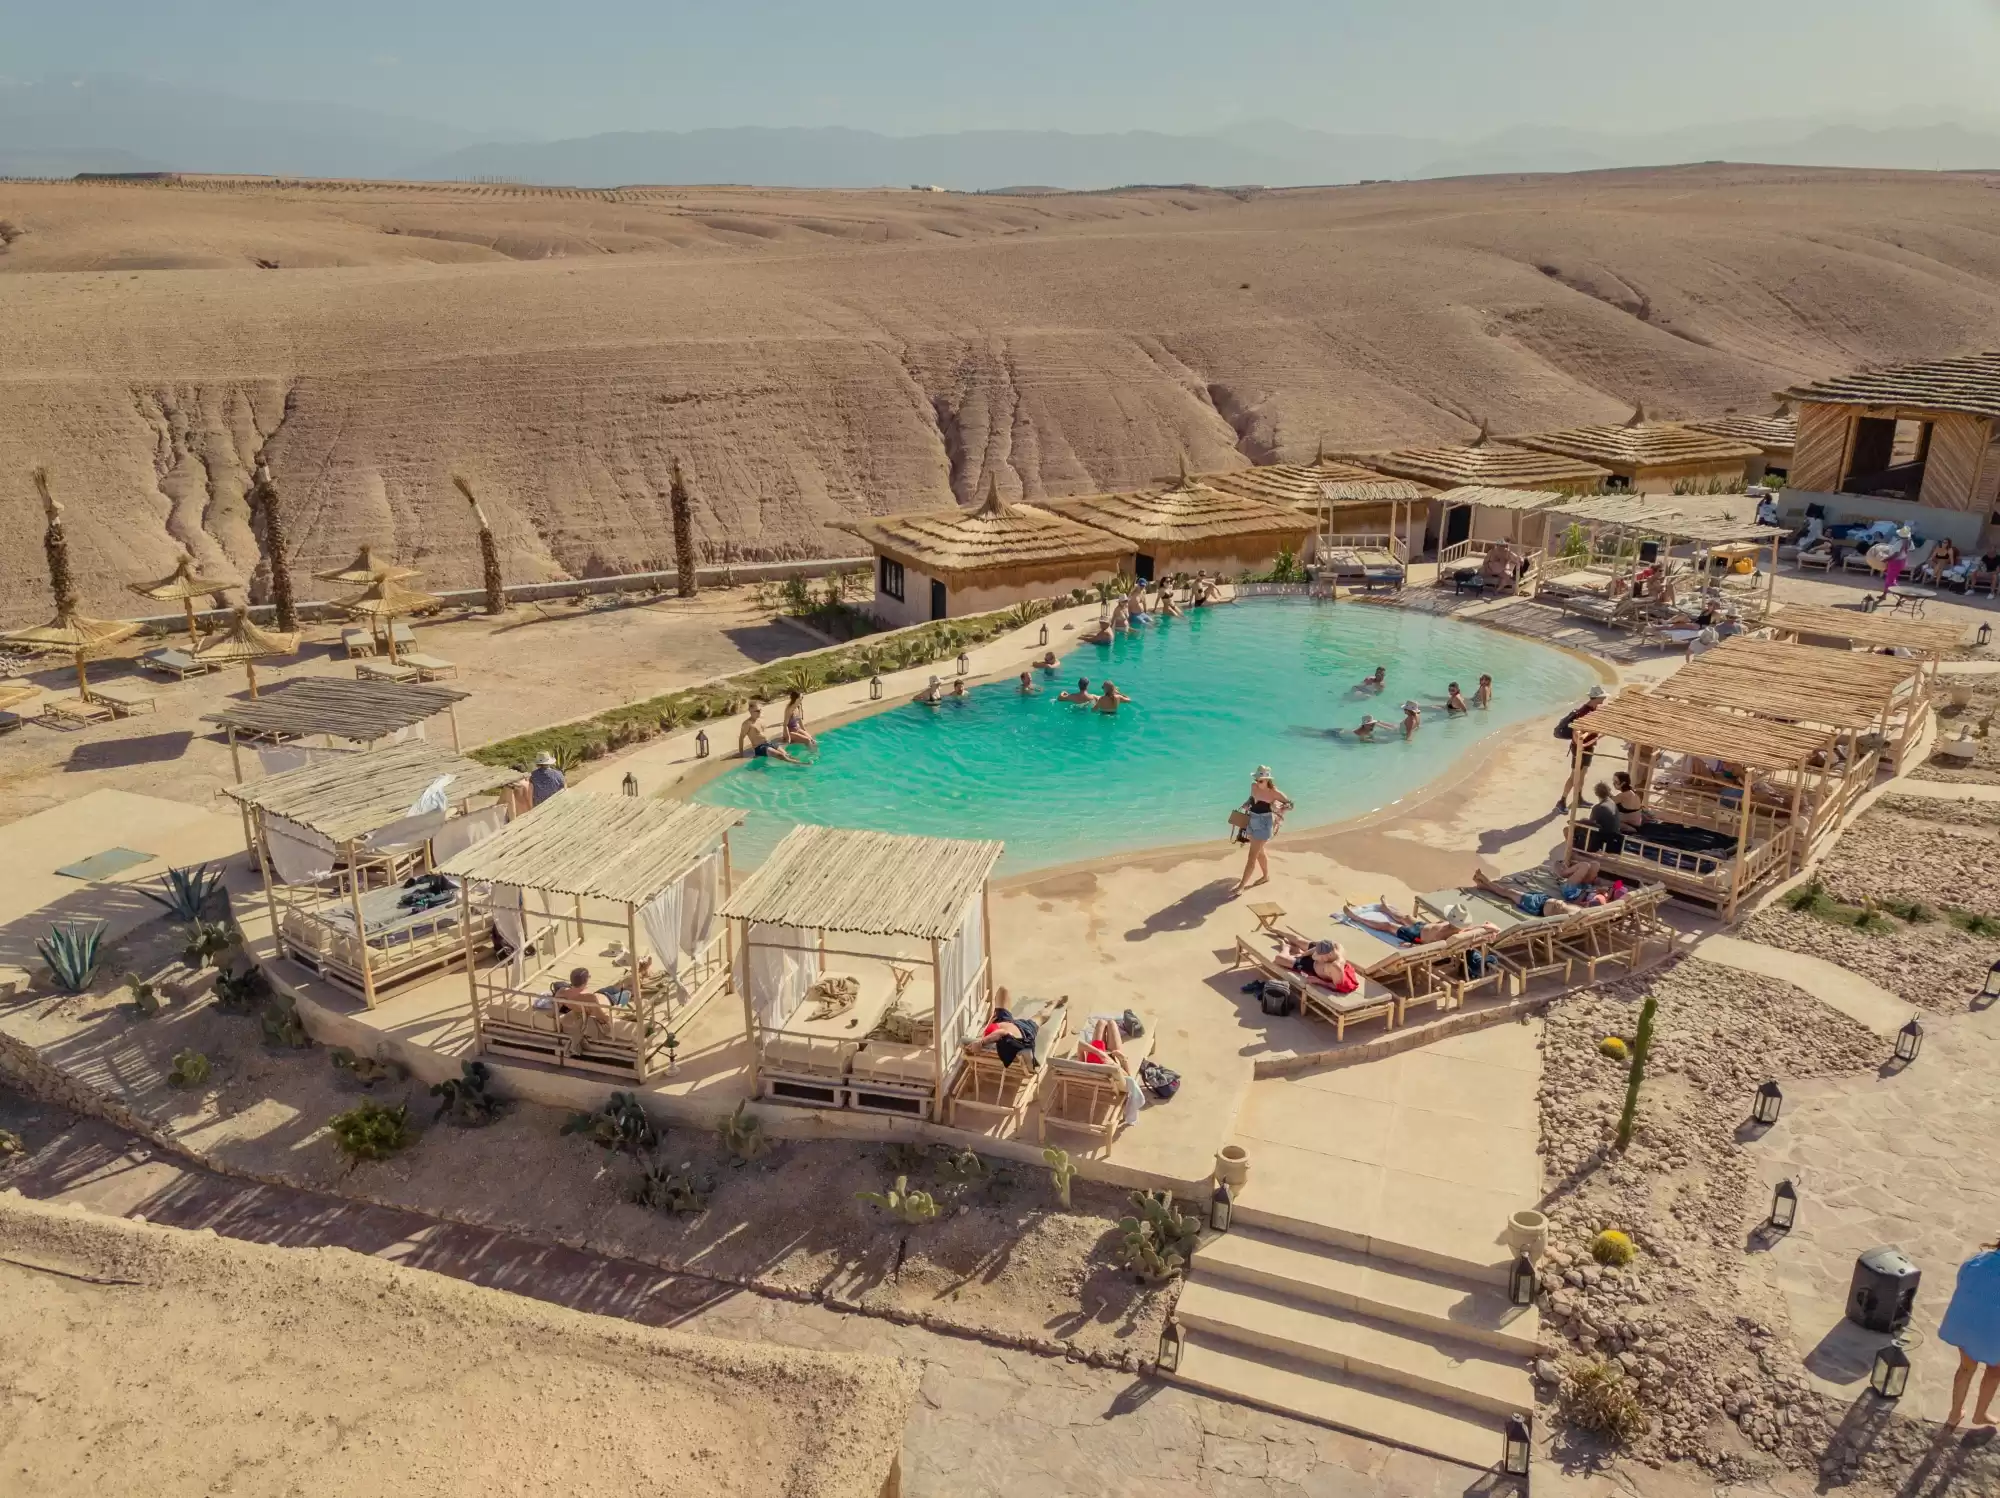  Pool Day and Lunch / dinner in Agafay Desert: An Oasis Amidst the Dunes